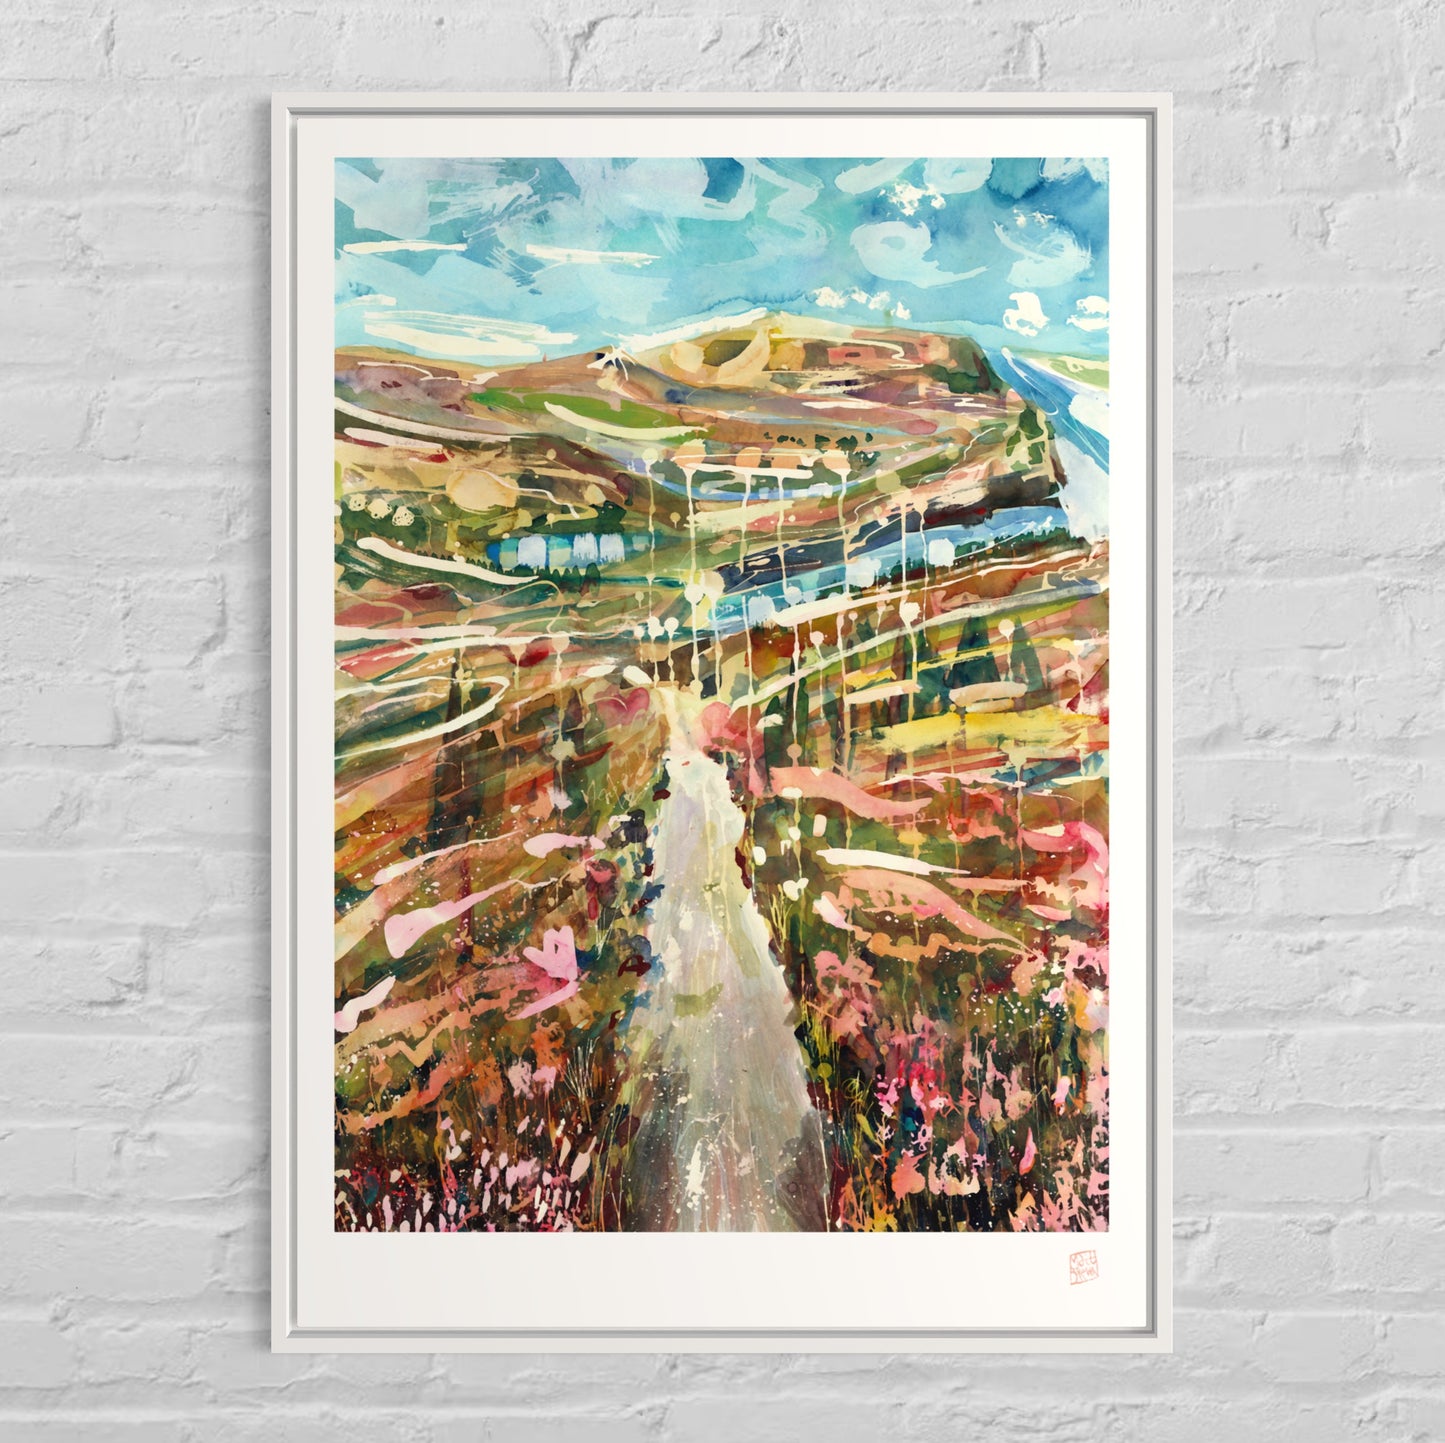 Limited Edition Print - The Way is Grateful